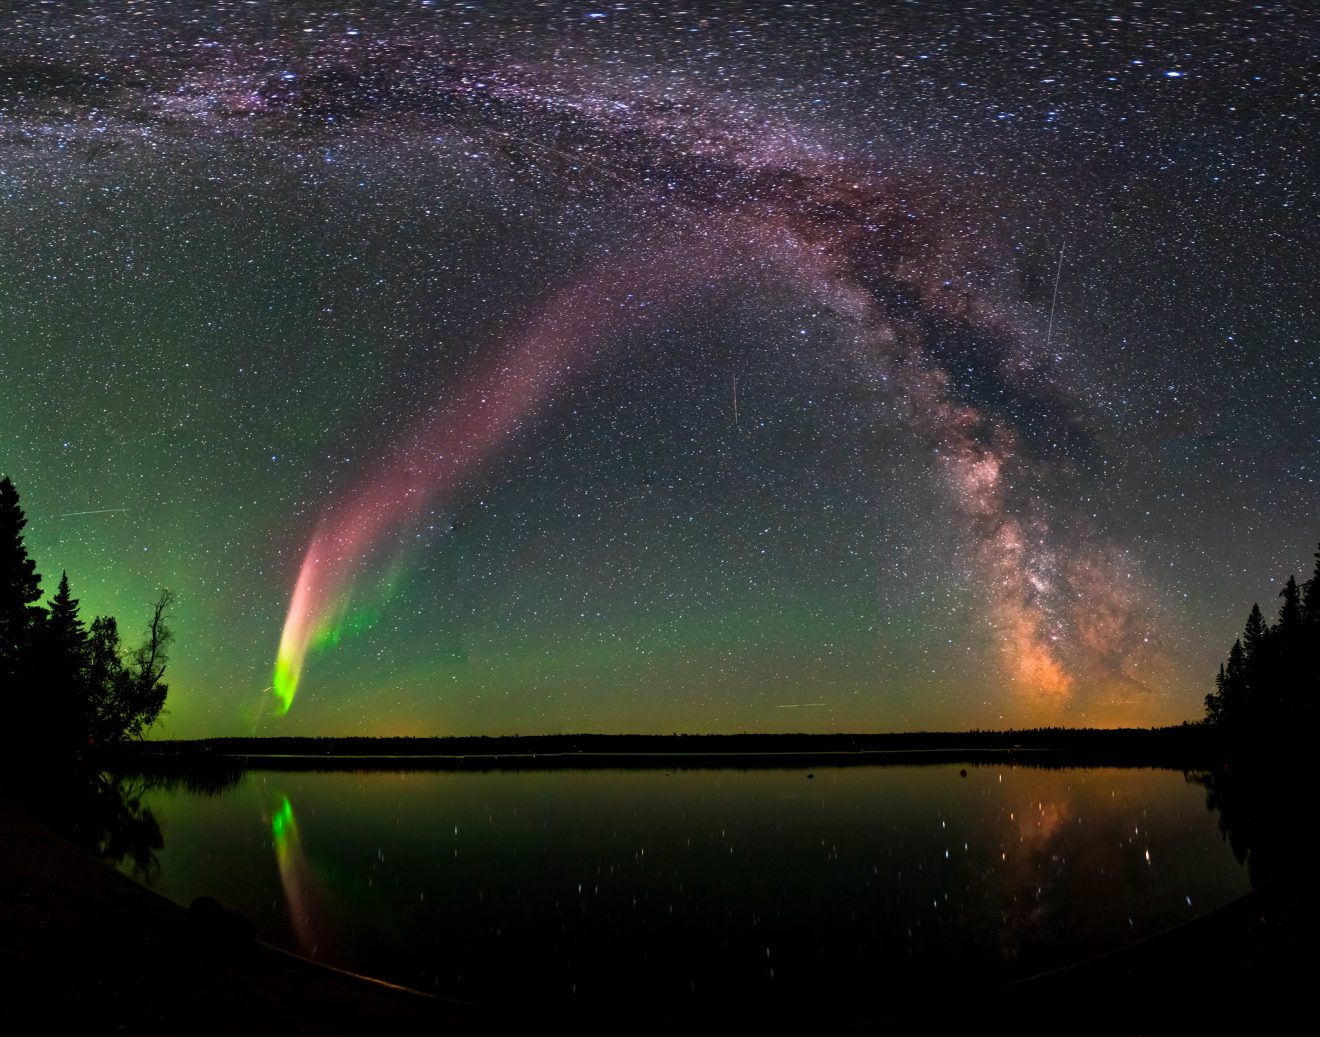 A photo of STEVE (Strong Thermal Emission Velocity Enhancement) and the Milky Way at Childs Lake, Manitoba, Canada.